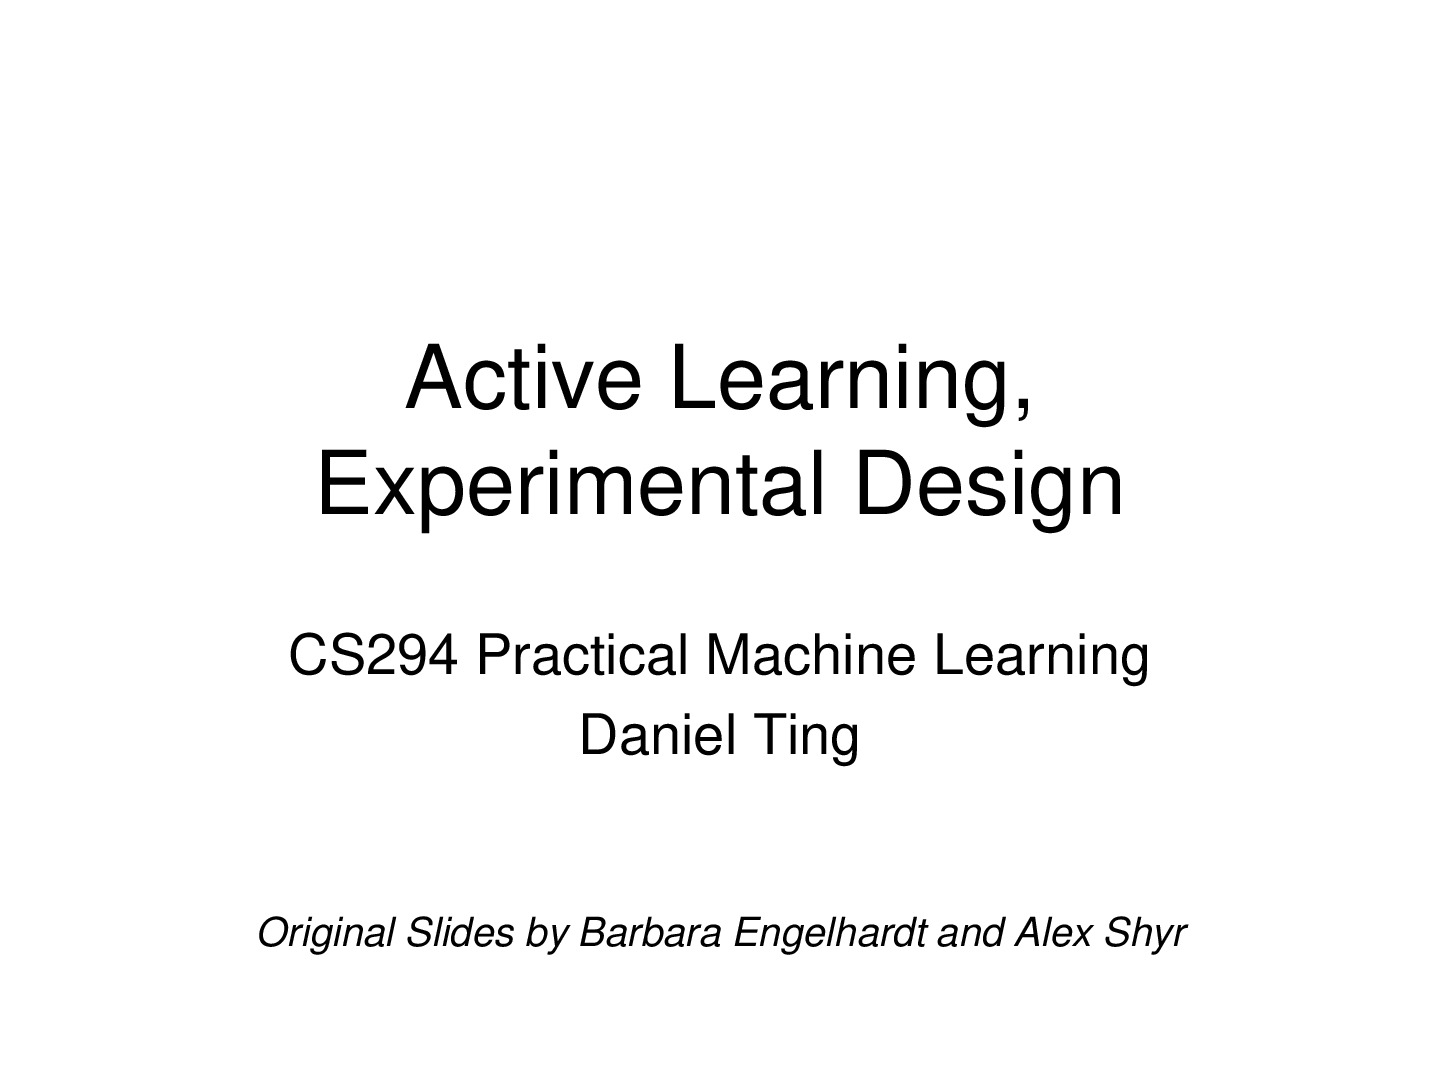 9[Oct 22]Active learning, experimental design [Daniel Ting]